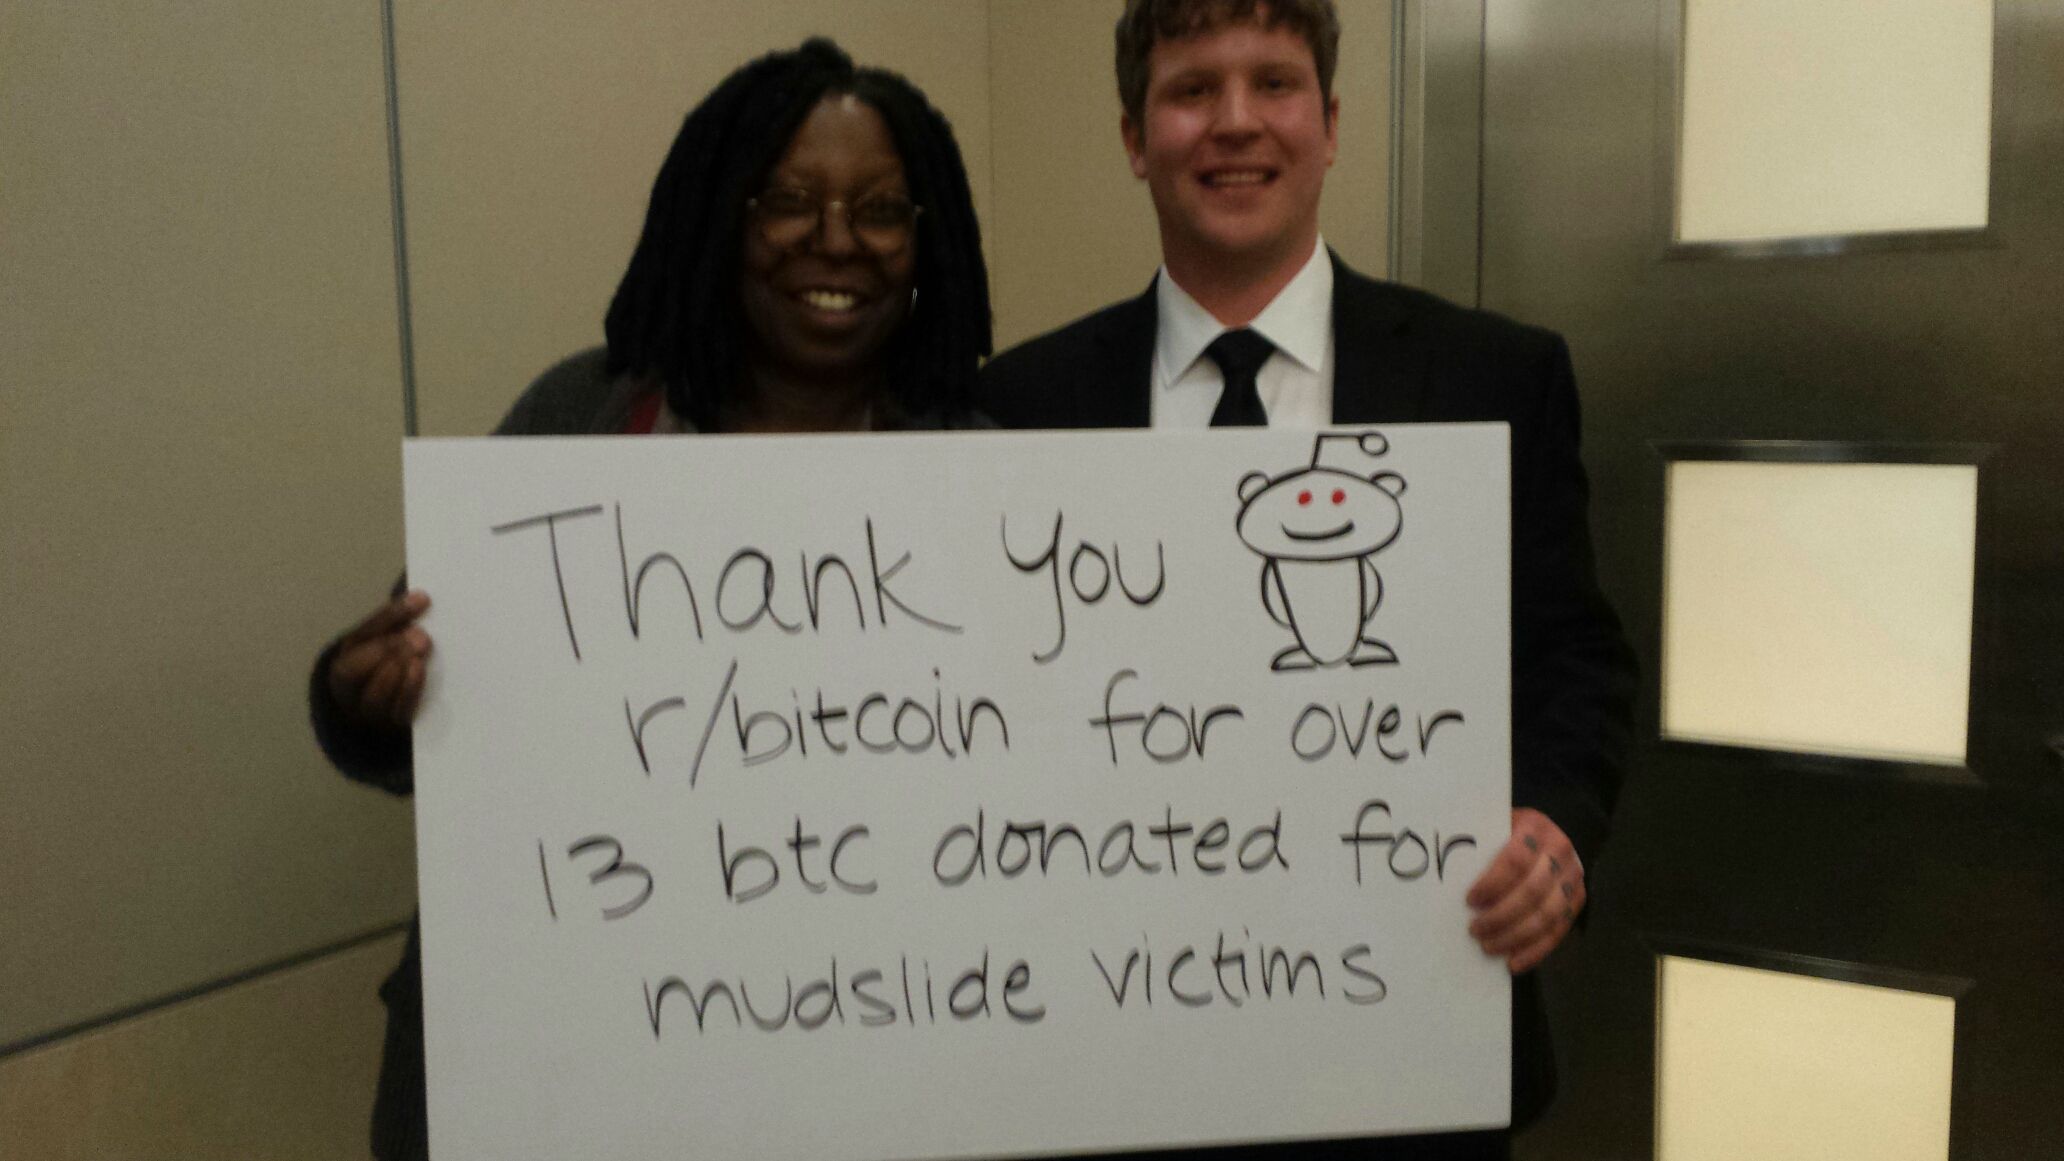 http://www.reddit.com/r/Bitcoin/comments/22nctw/thank_you_rbitcoin_for_over_13_btc_donated_to/